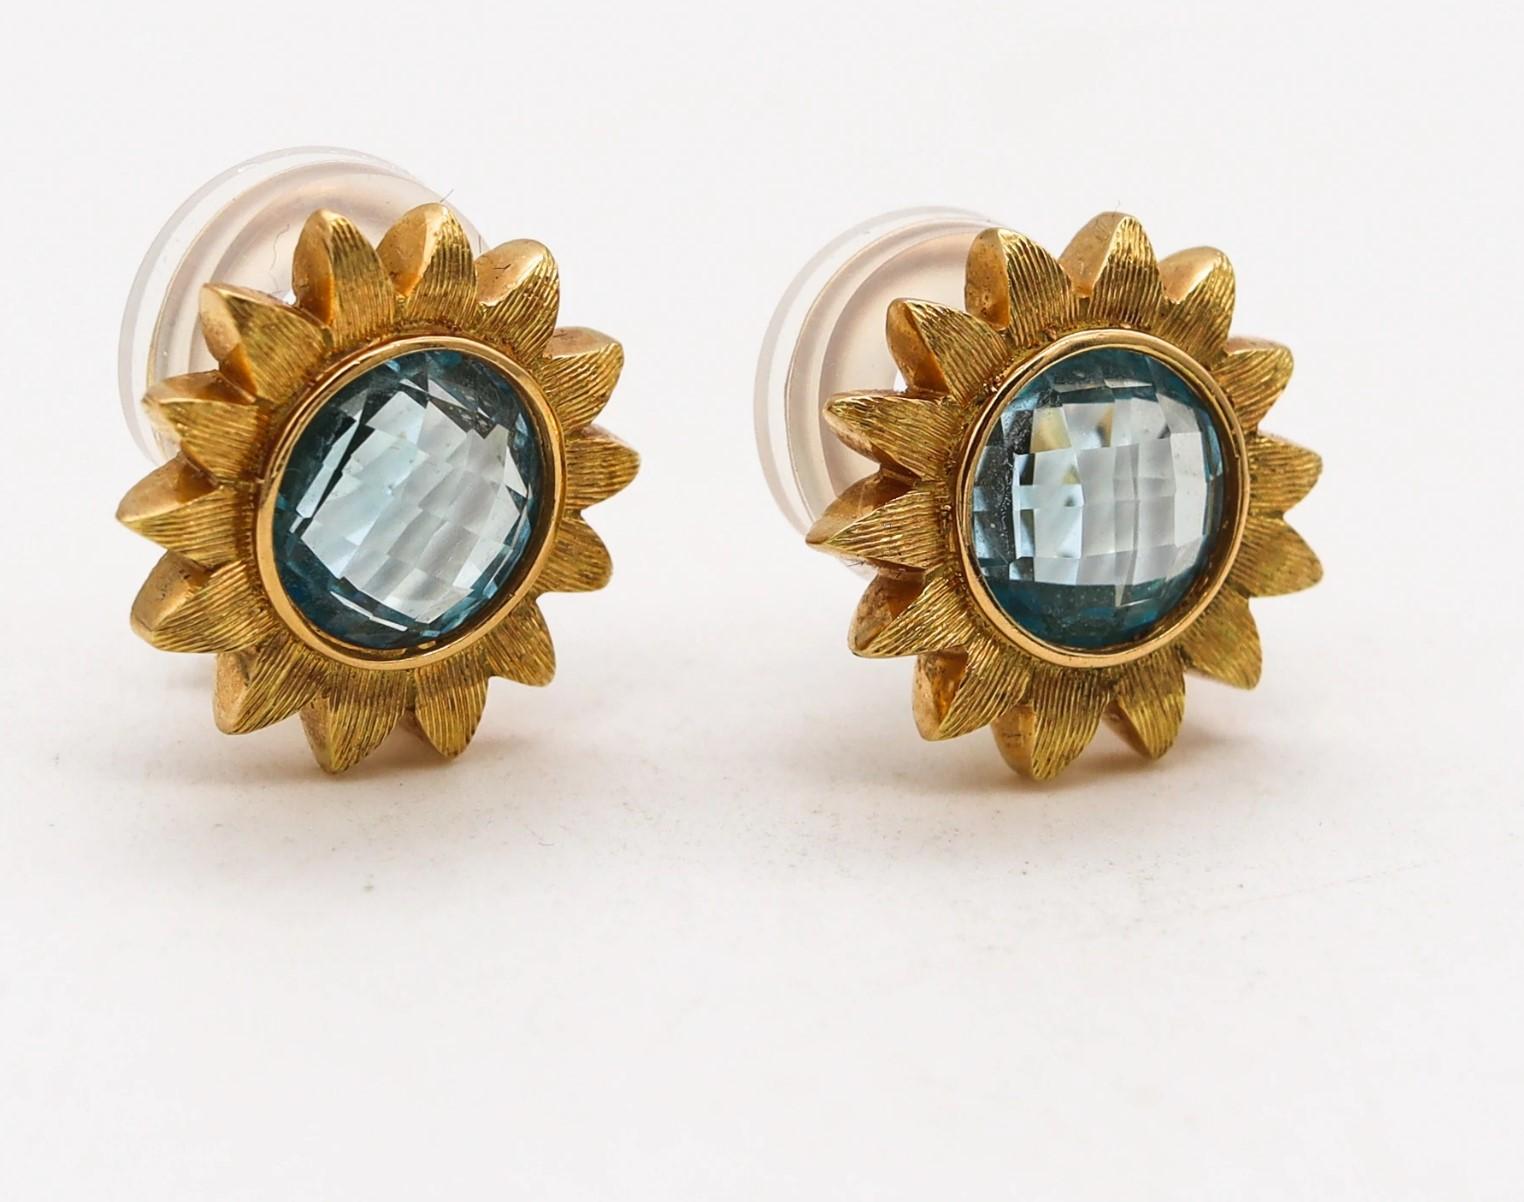 Sunflowers clips-earrings designed by Robert Bruce Bielka.

Wonderful youthful organic pair, created by Robert Bruce Bielka, back in the late 20th century. These clip earrings was carefully crafted with great attention to details in the shape of